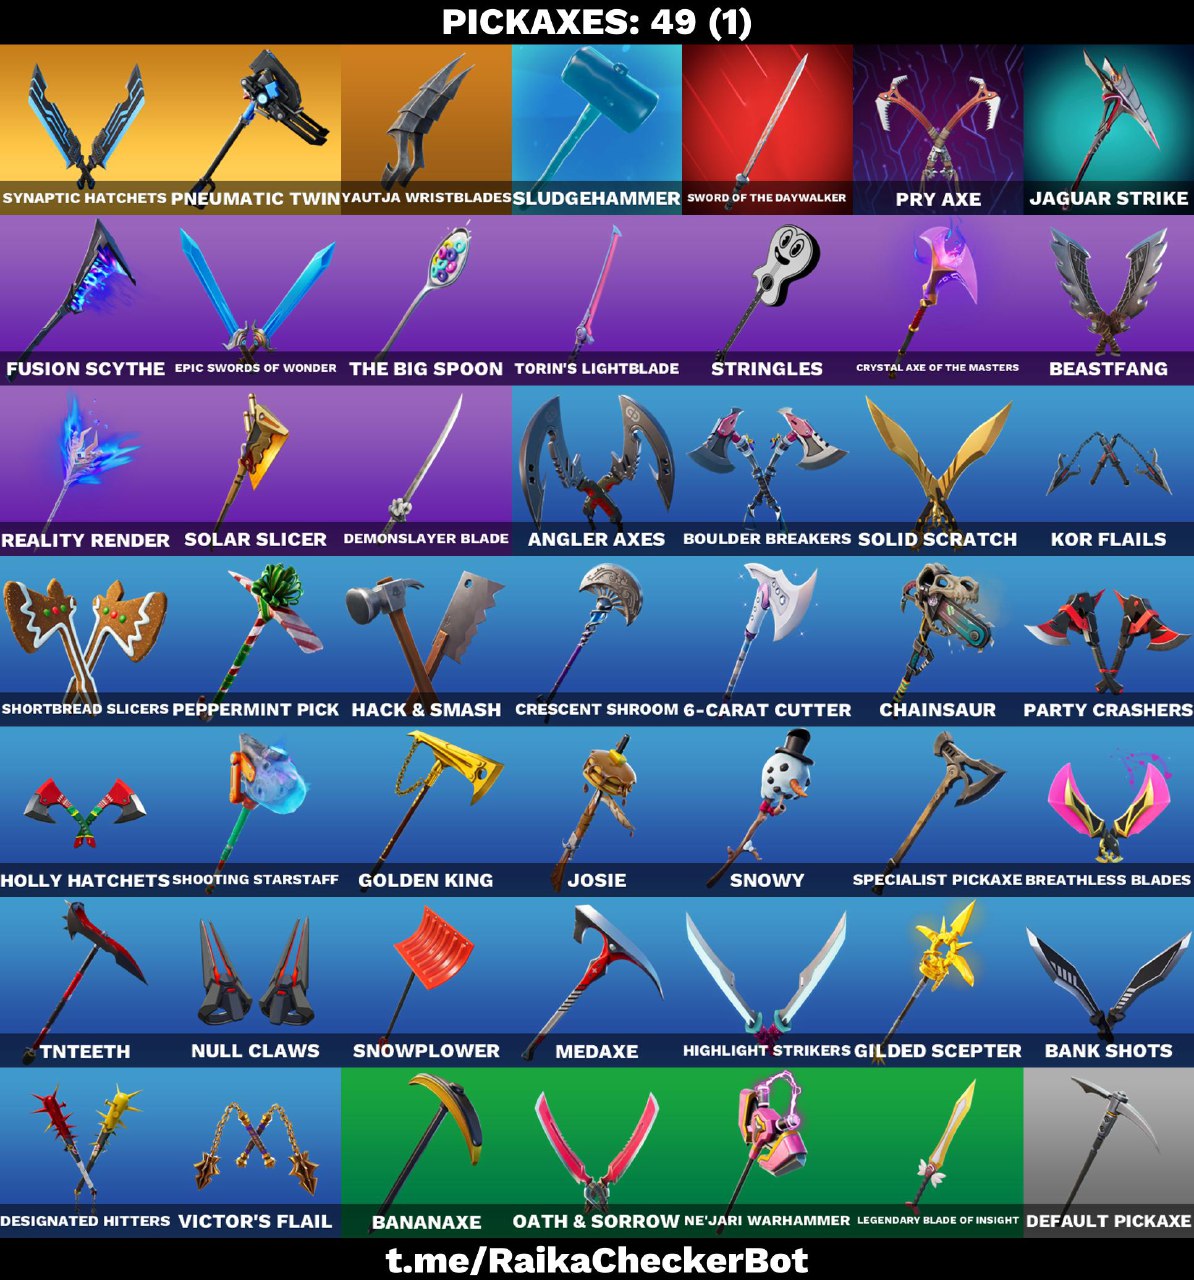 FULL ACCESS | 48 SKINS | PRODIGY | TRILOGY | CARBON COMMANDO | POINT PATROLLER | RECON STRIKE | RELIANT BLUE | CARBON PACK | TABULATOR |